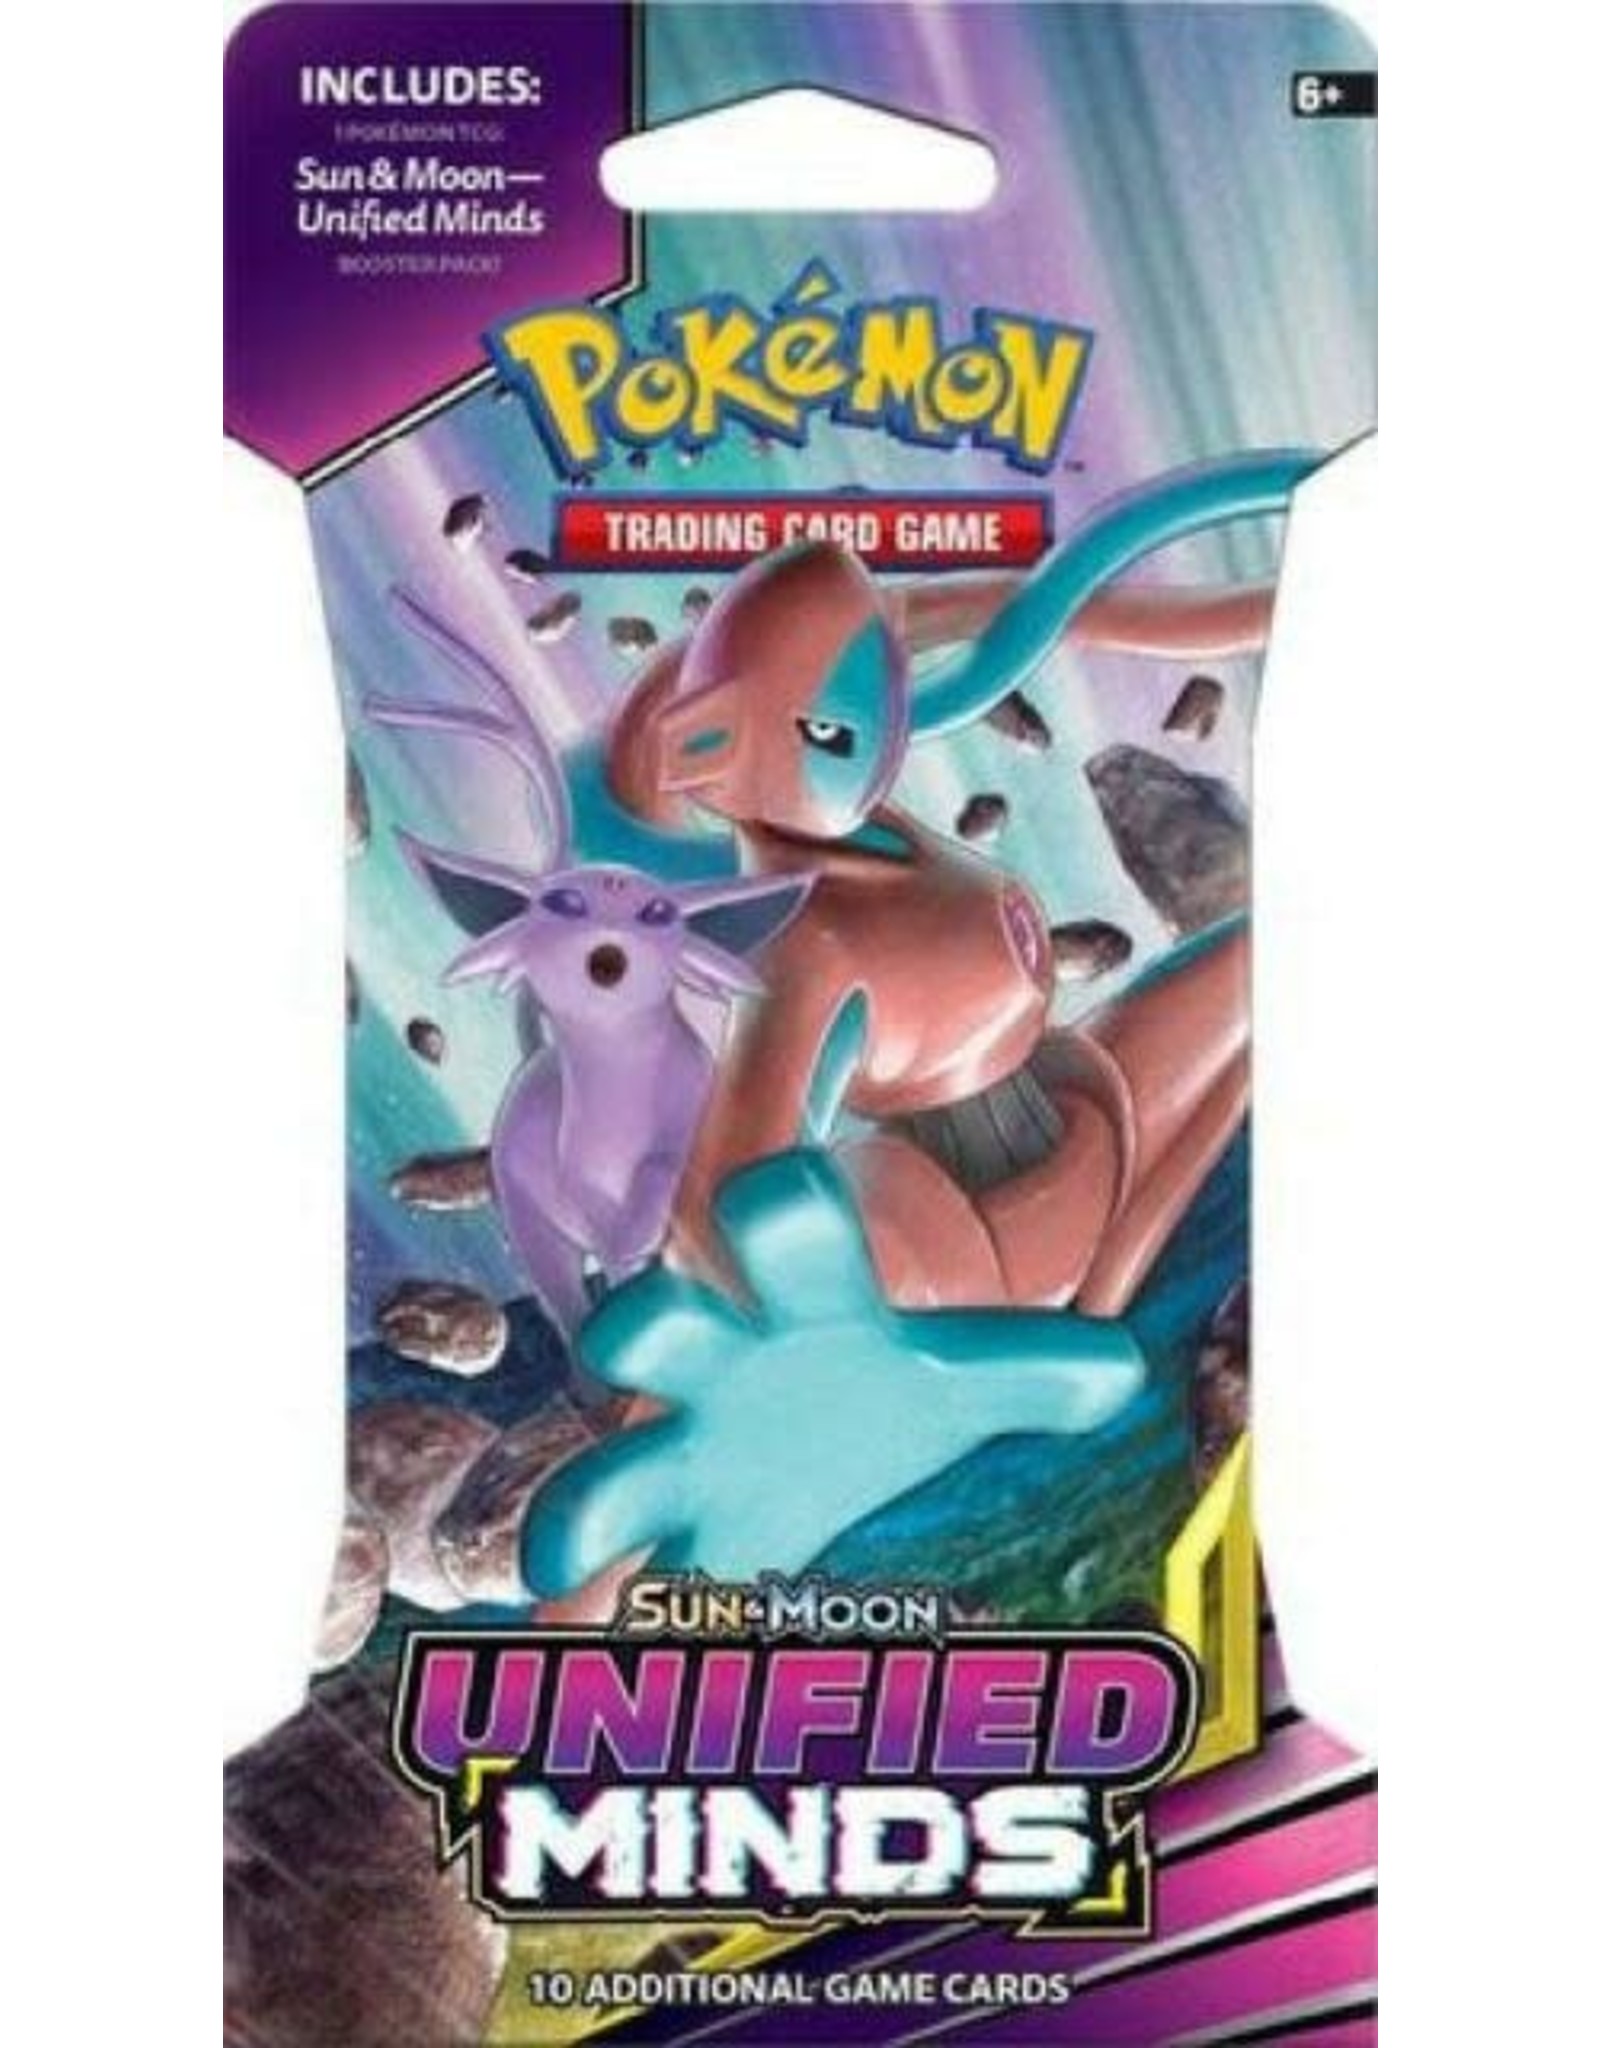 Pokemon Unified Minds Sleeved Booster Pack No Refunds Exchanges The Wandering Dragon Game Shoppe Thistle Twig Wild Bird And Nature Shoppe